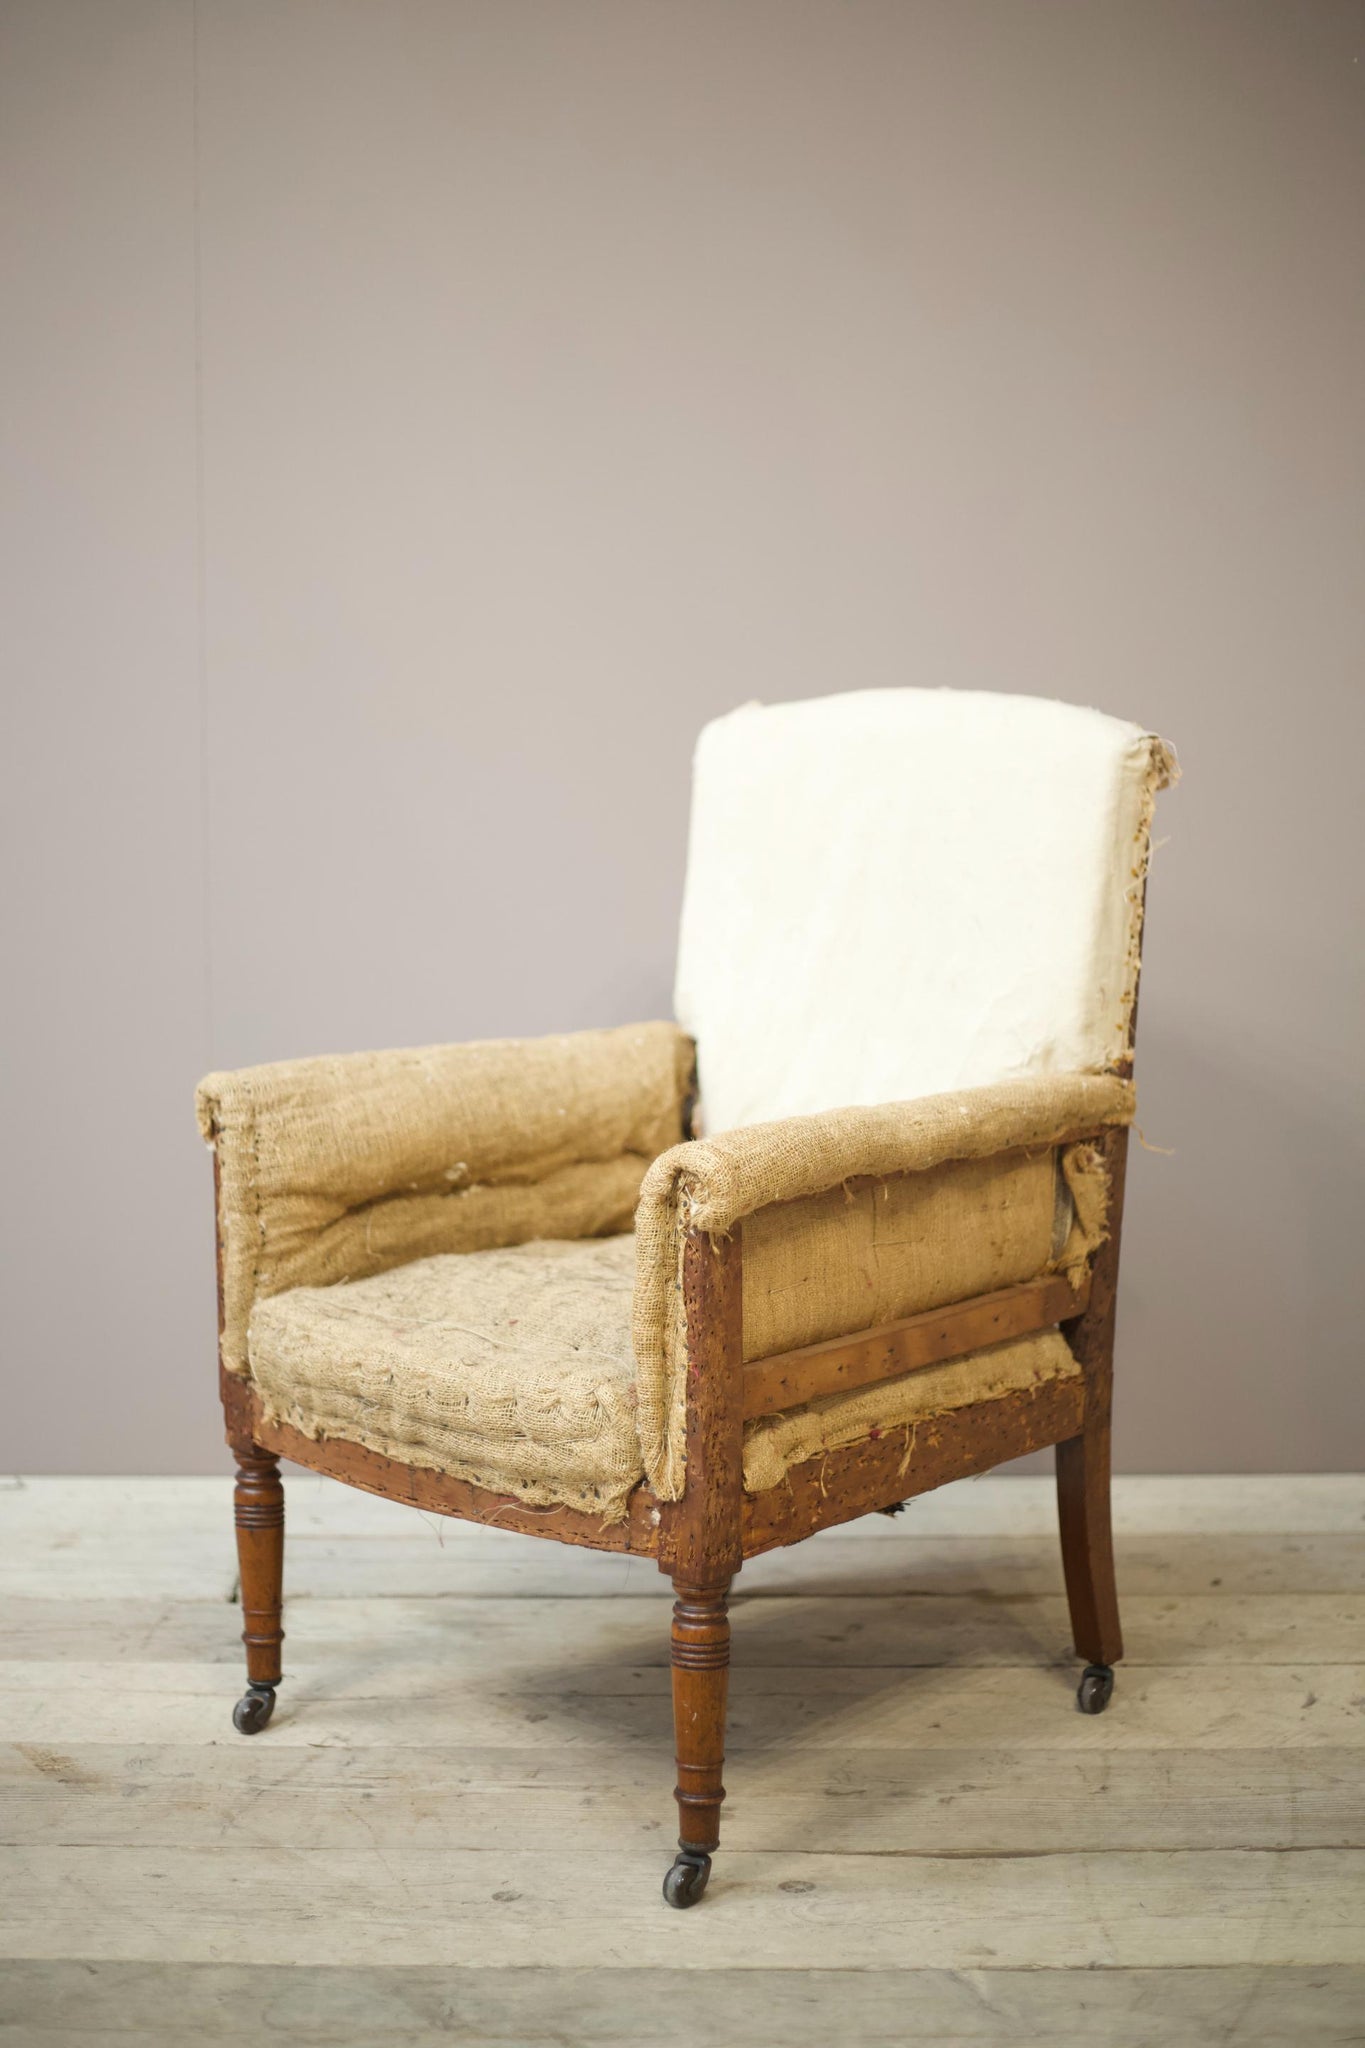 19th century English country house armchair